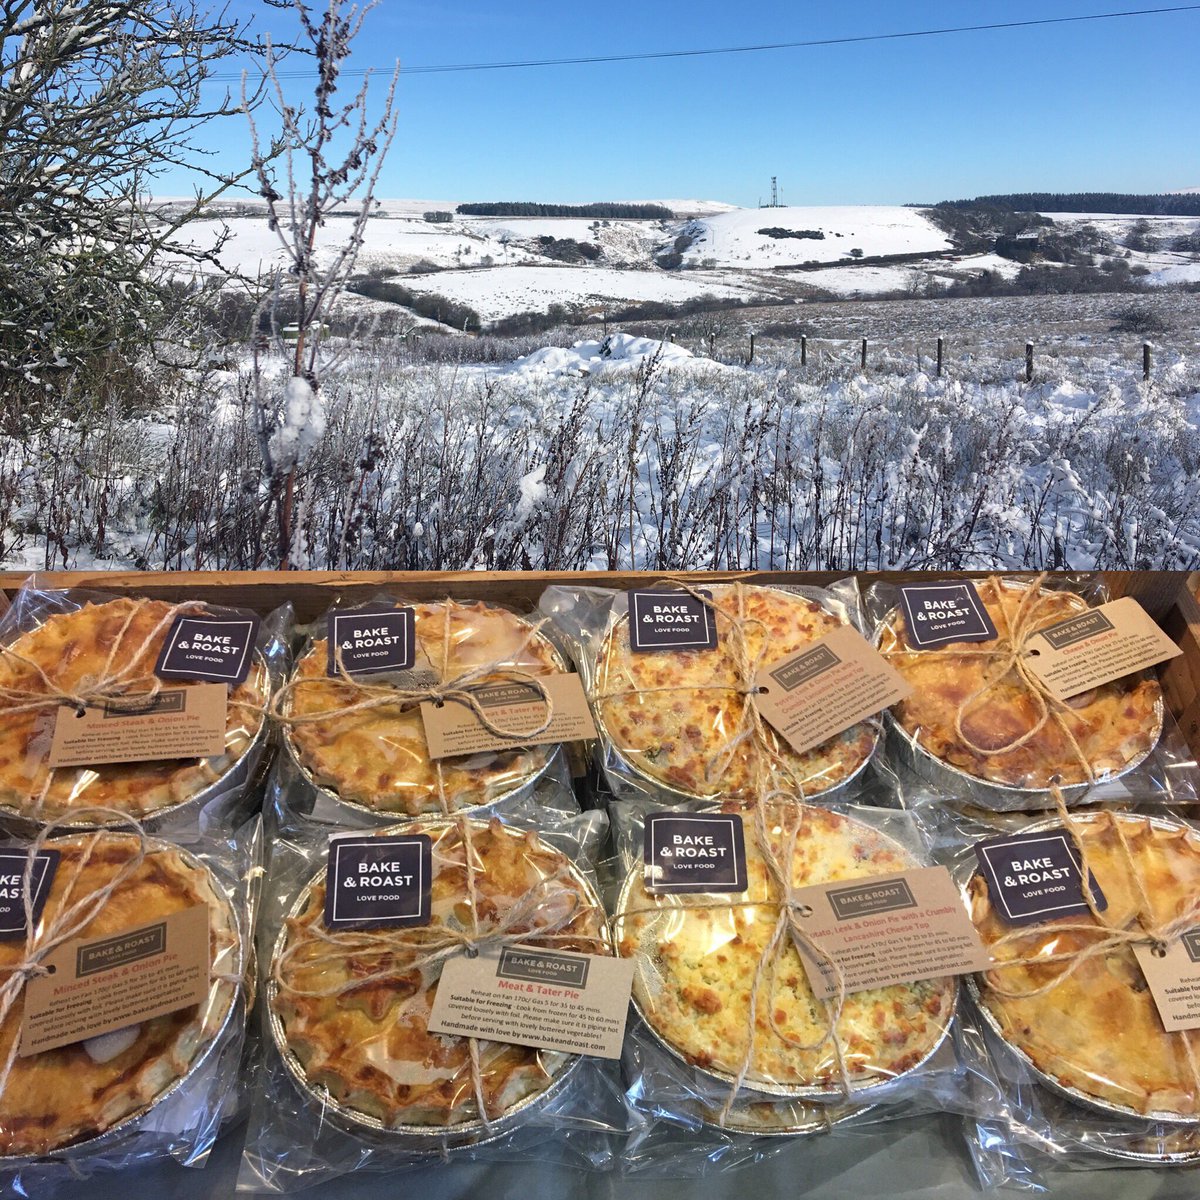 Today I will be mostly delivering pies to the Alps...er... I mean @lottiesofbelmont !!!! Shelves restocked and perfect for a winter comfort tea! #beautifulbelmont #comfortfood #pies #bakeandroast